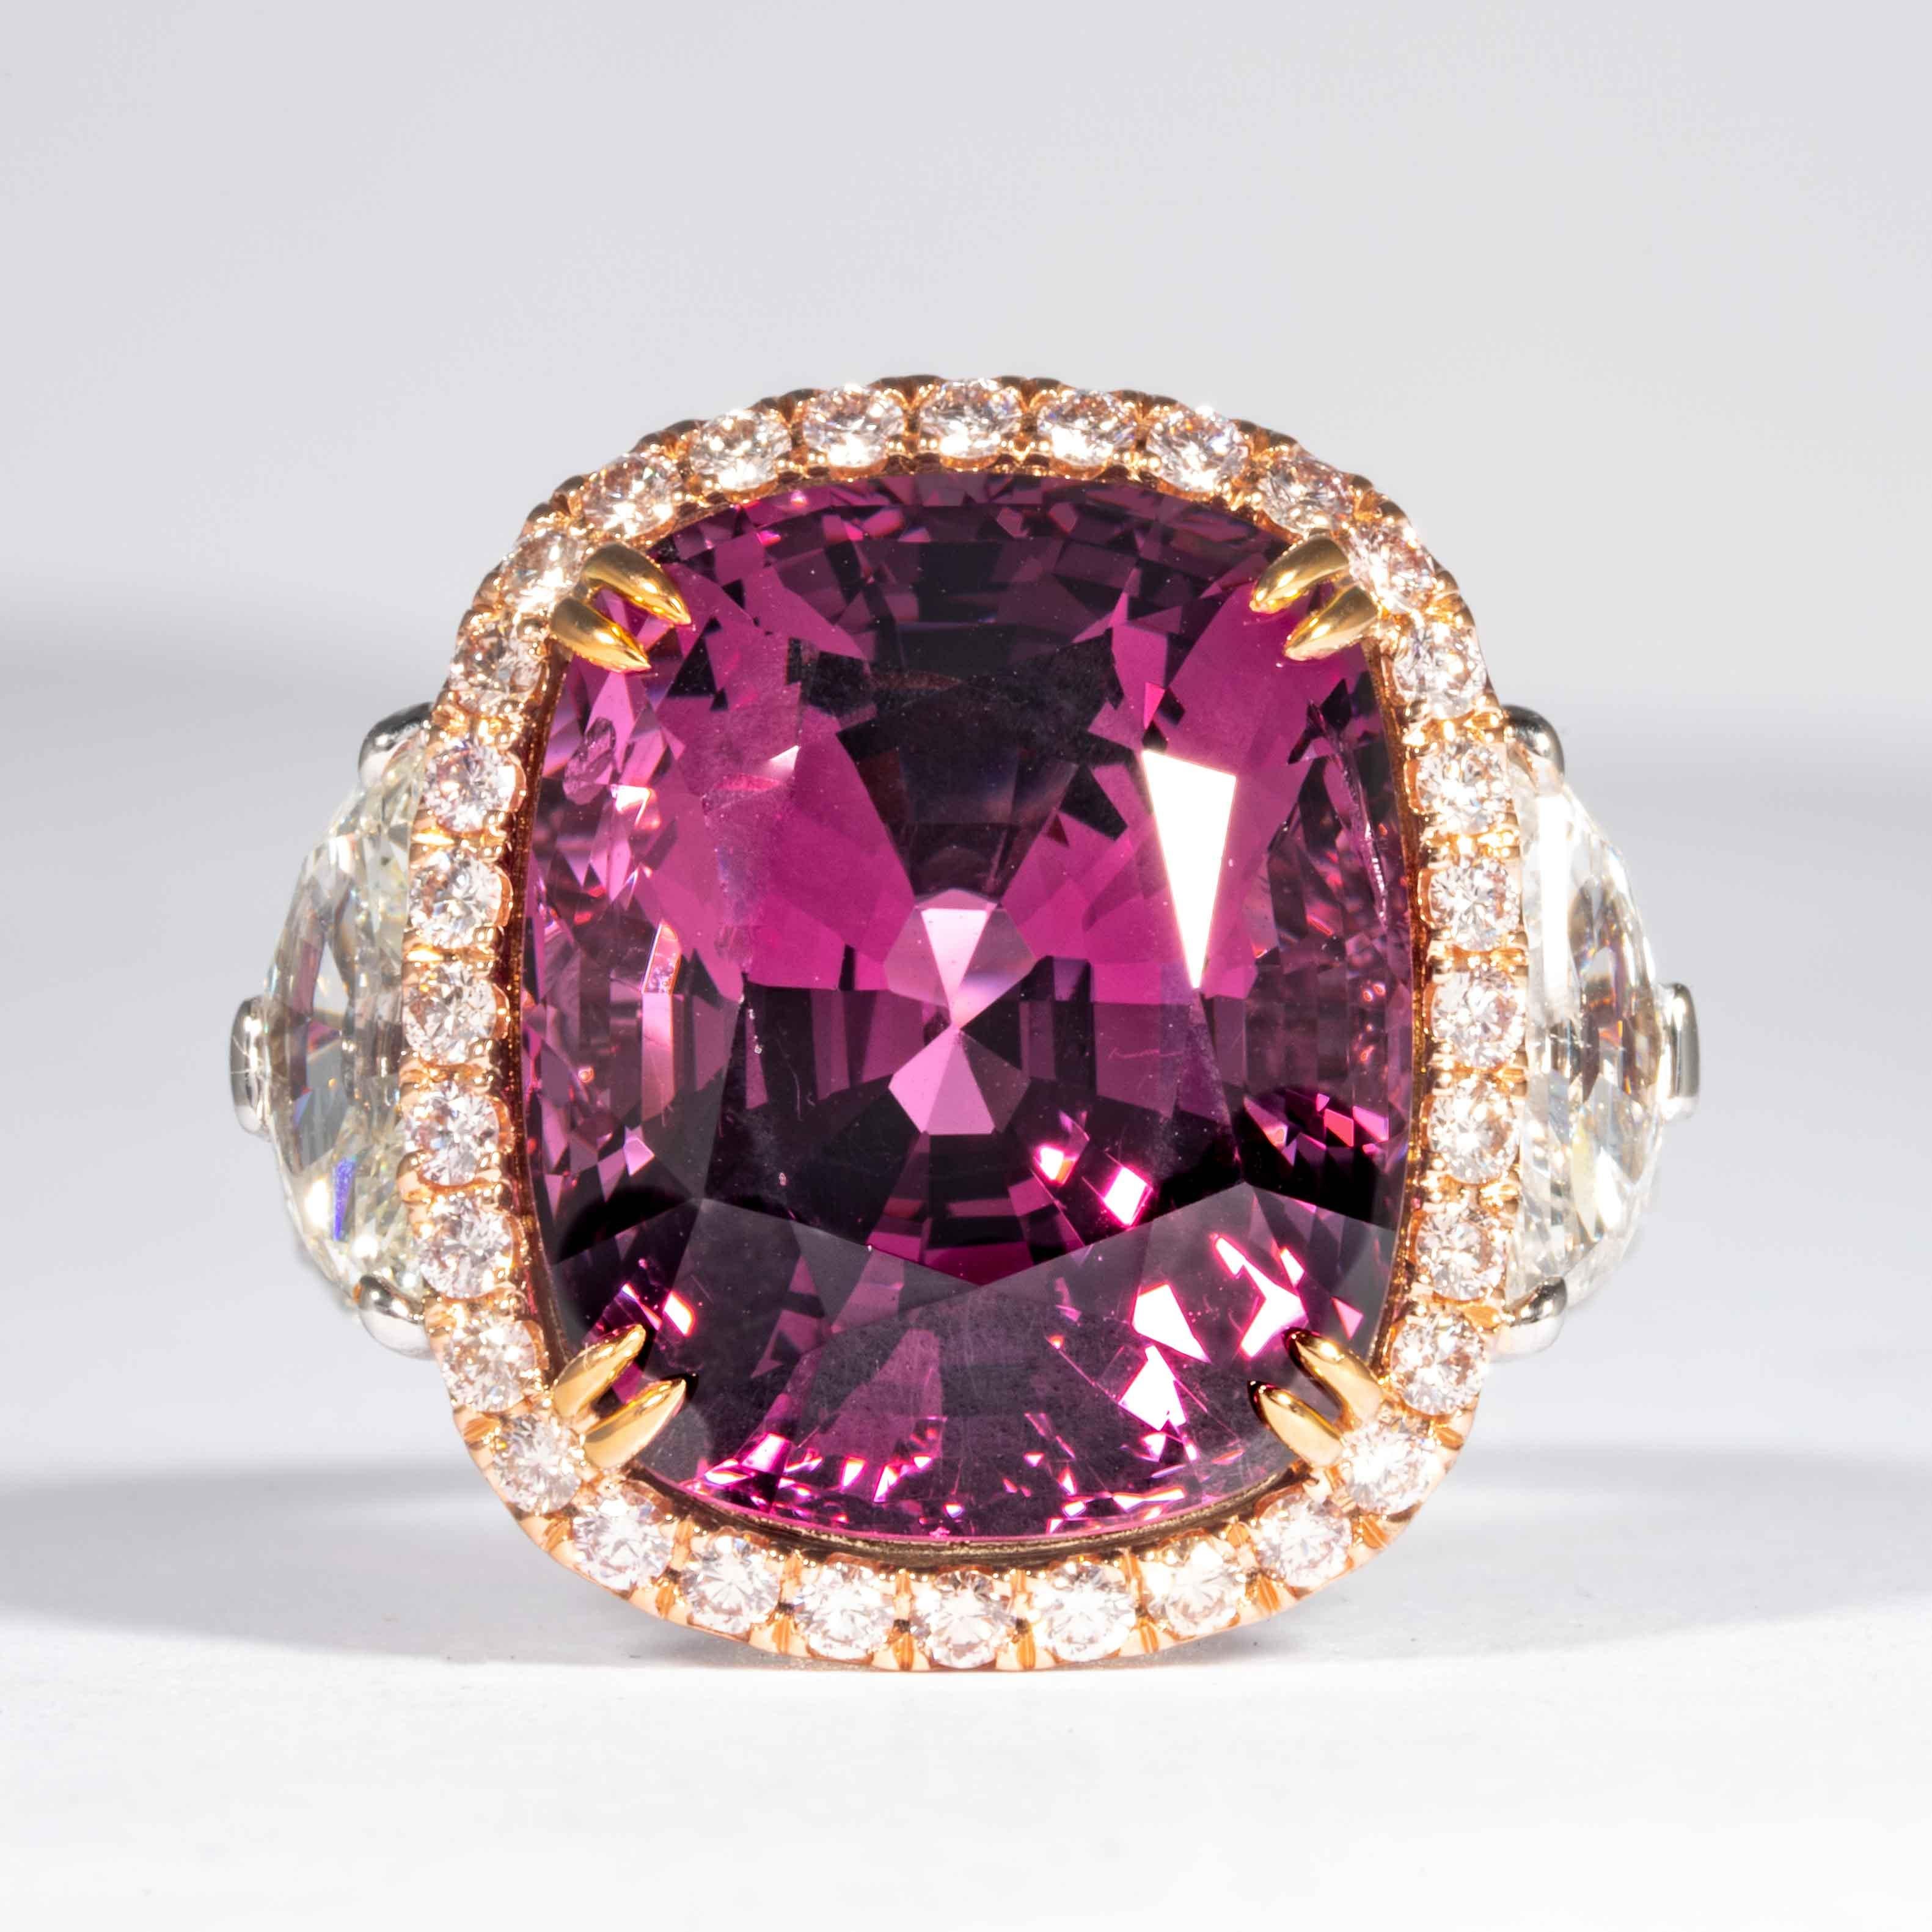 This large and rare pink spinel ring is offered by Shreve, Crump & Low. This intense pink spinel is custom set in a handcrafted Shreve, Crump & Low one-of-kind 18kt white gold and pink gold ring, consisting of 1 dazzling pinkish magenta colored